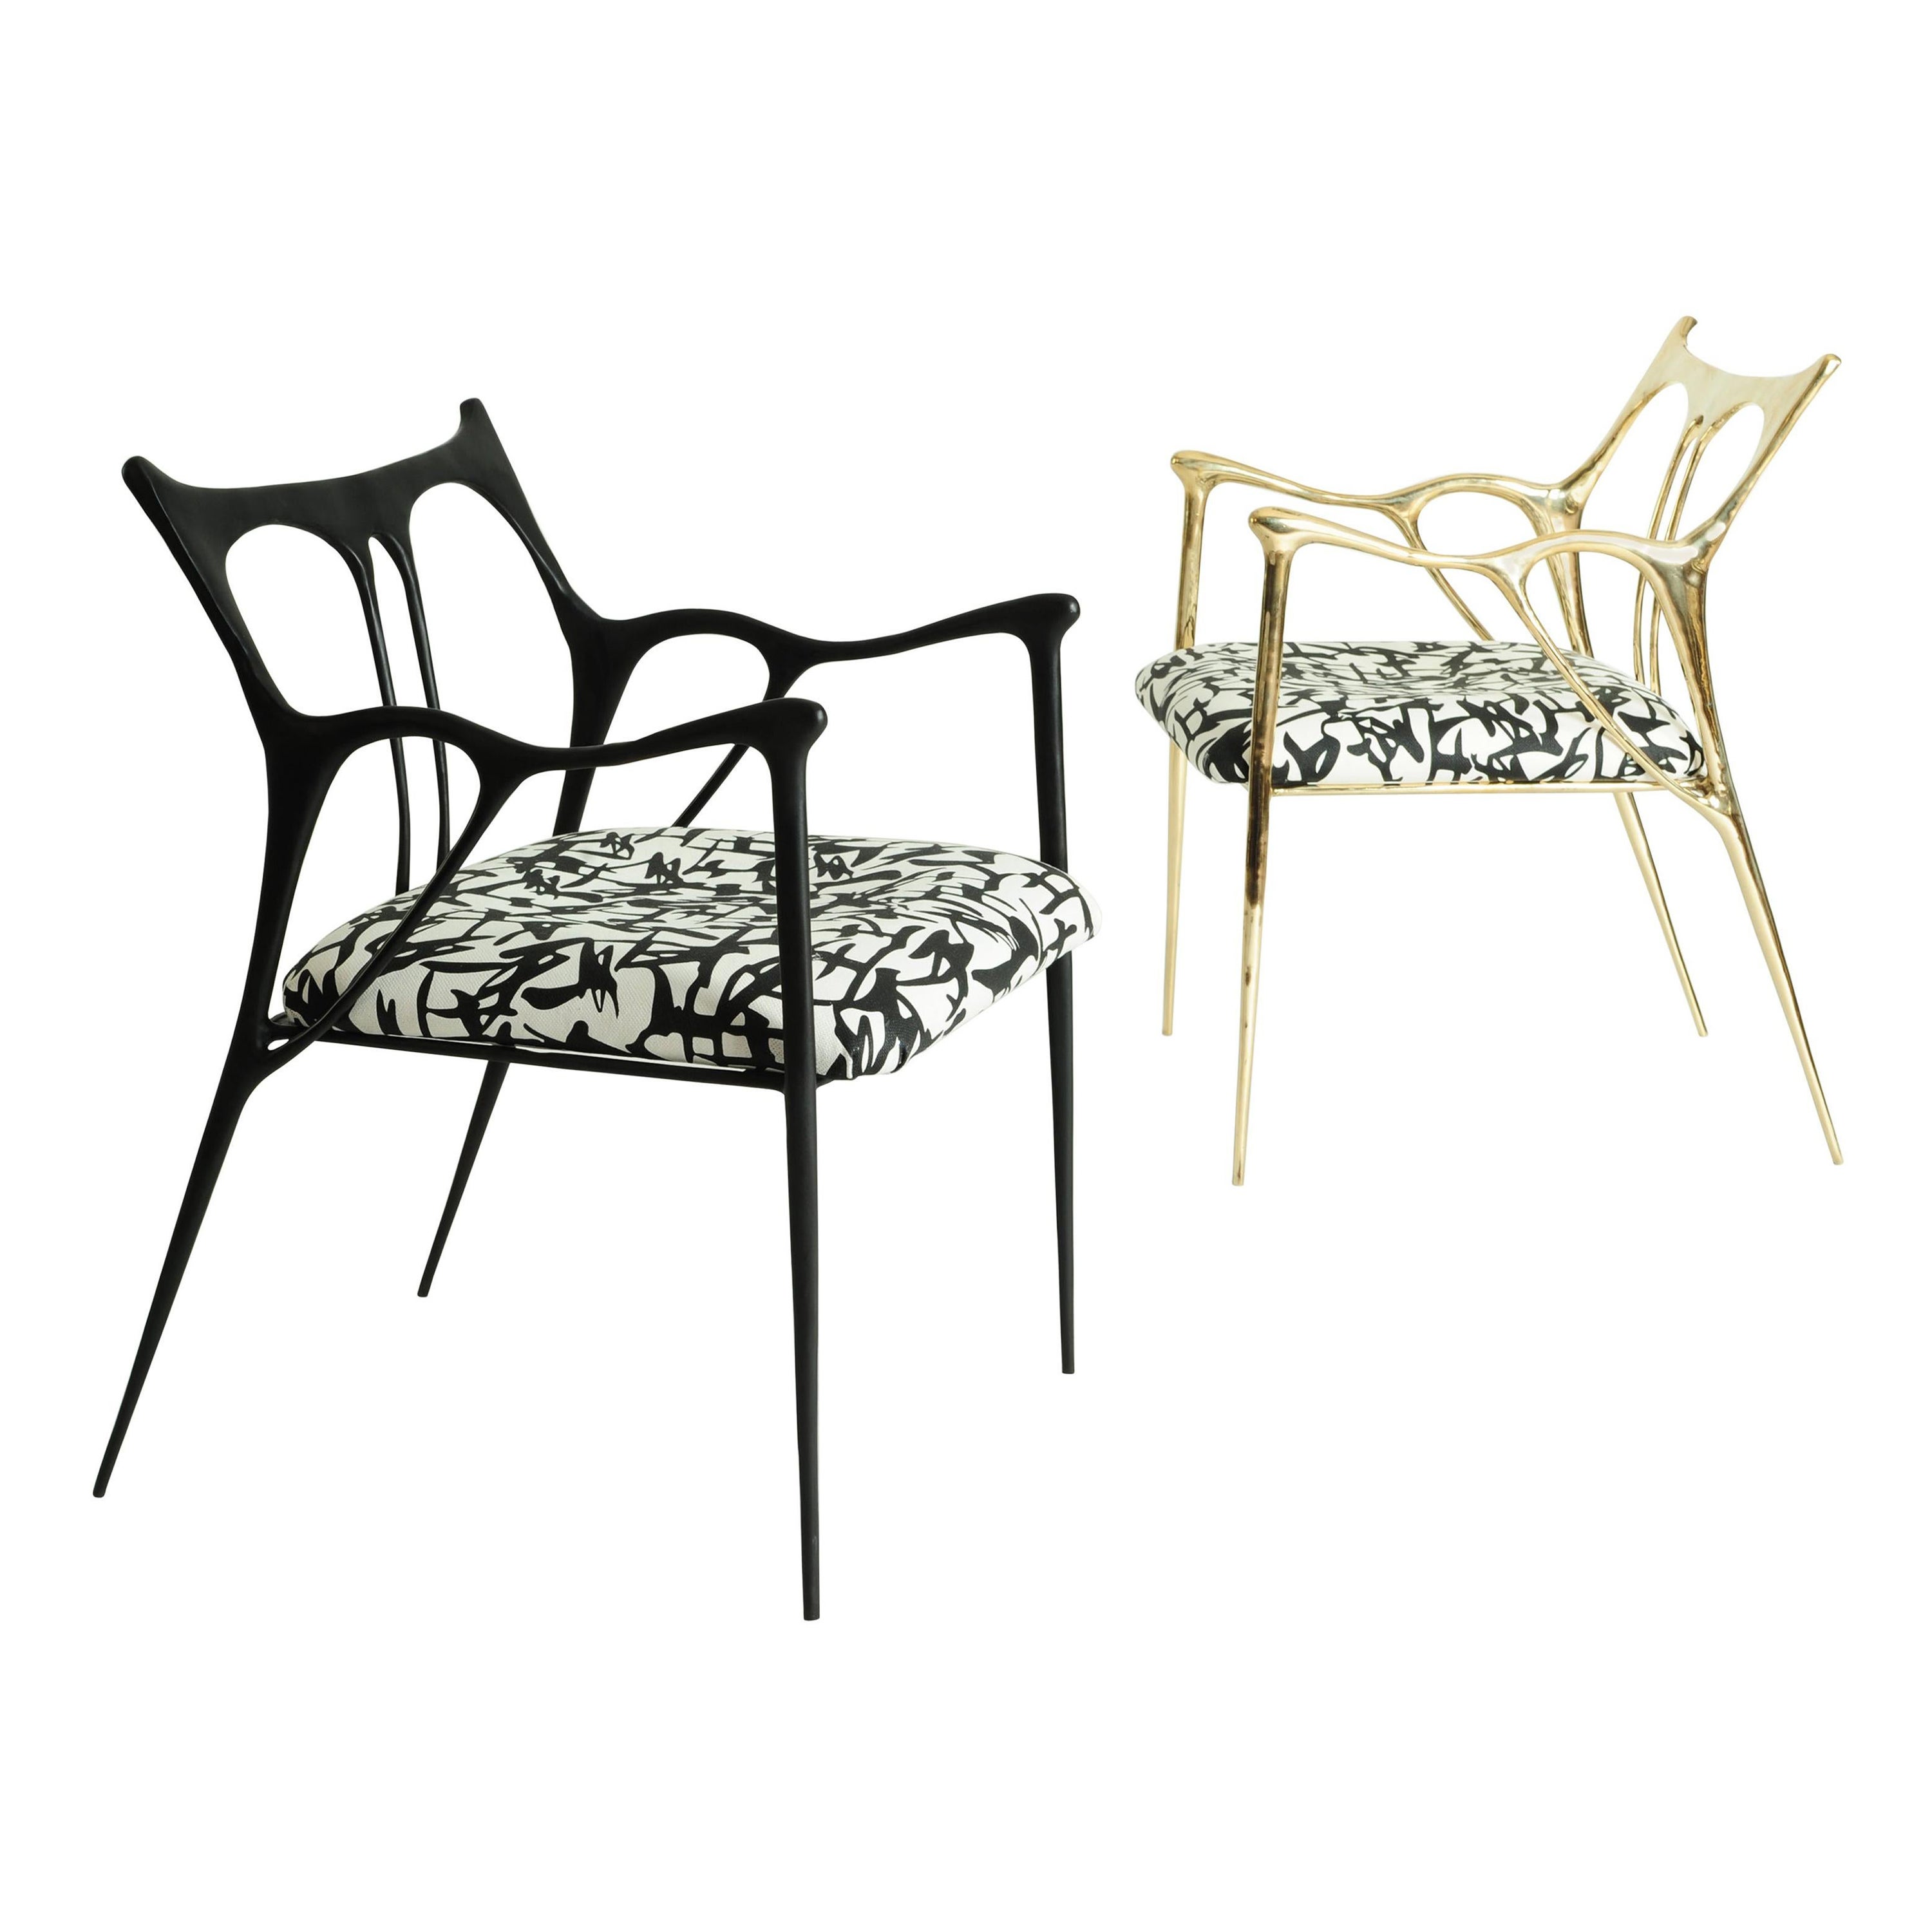 Pair of Sculpted Brass Chairs, Misaya For Sale